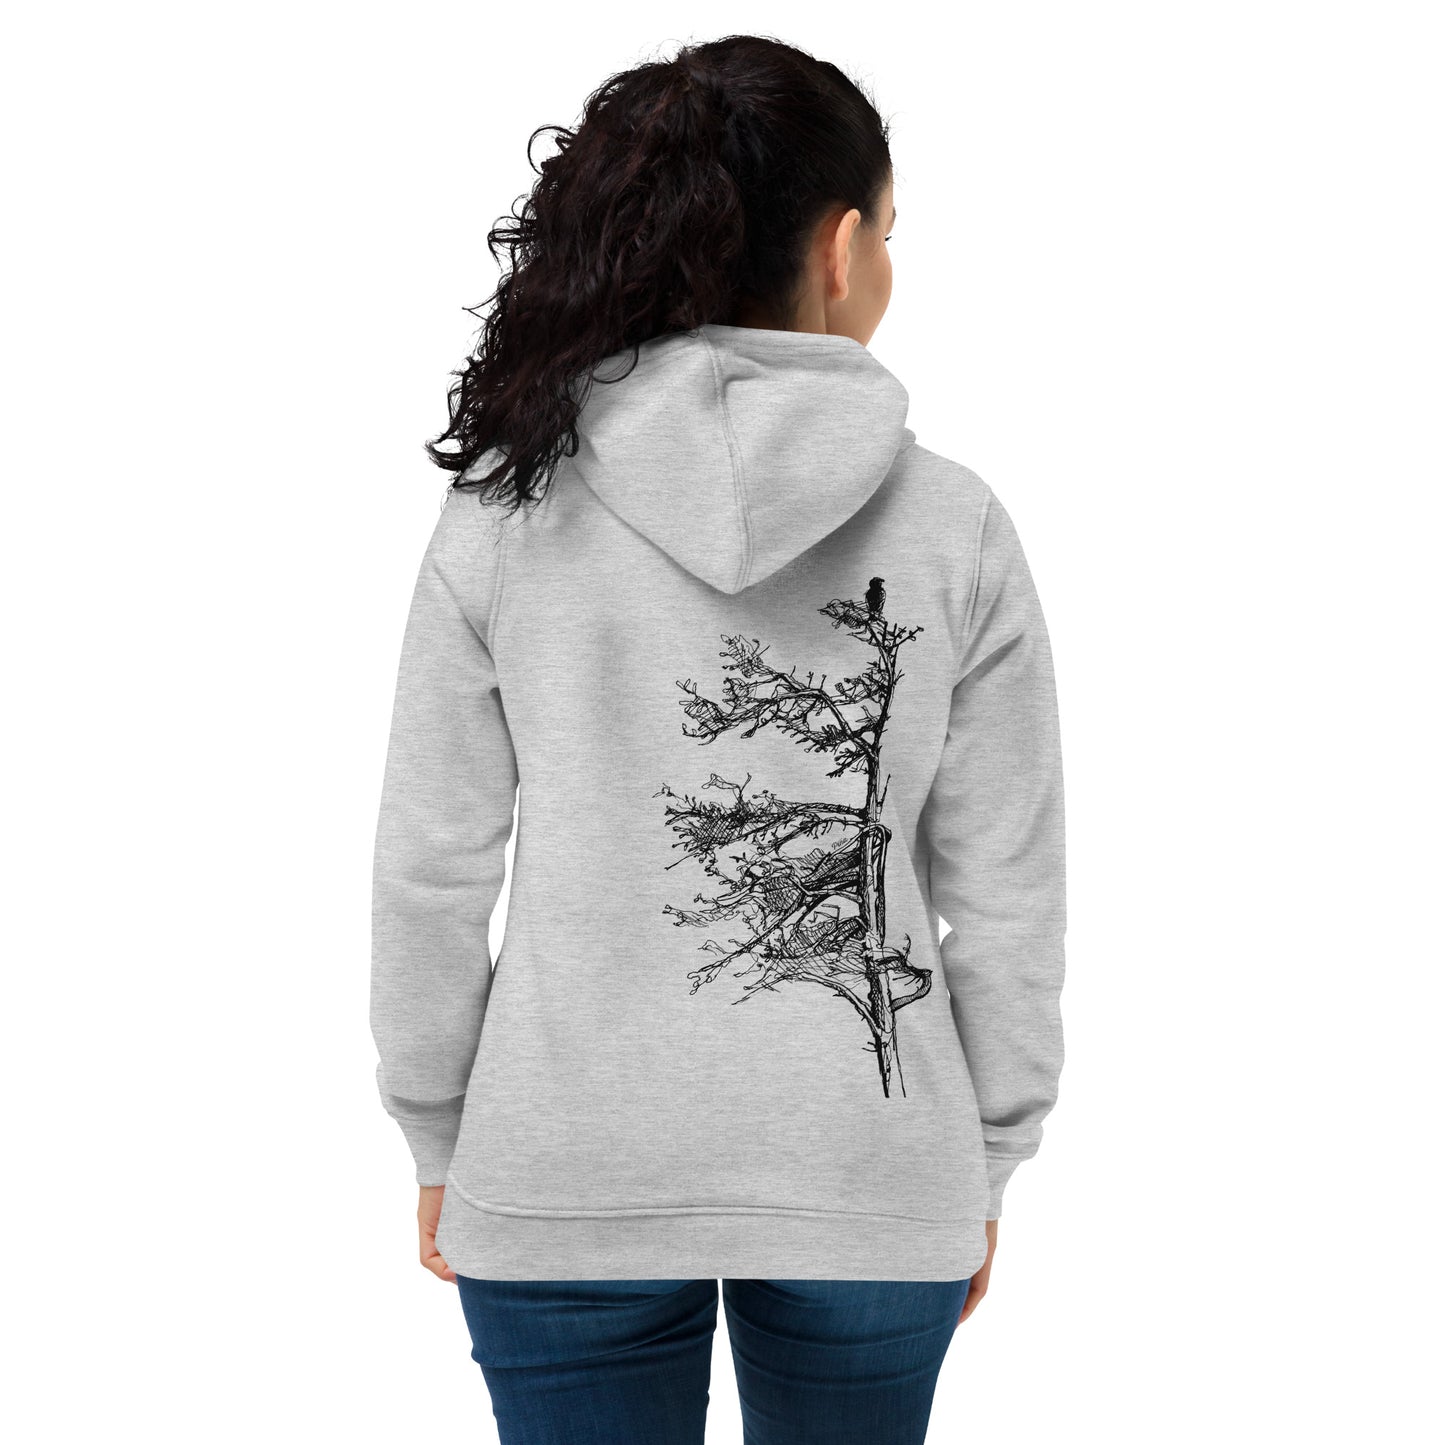 Hipster Eagle Ladies Eco Fitted Hoodie